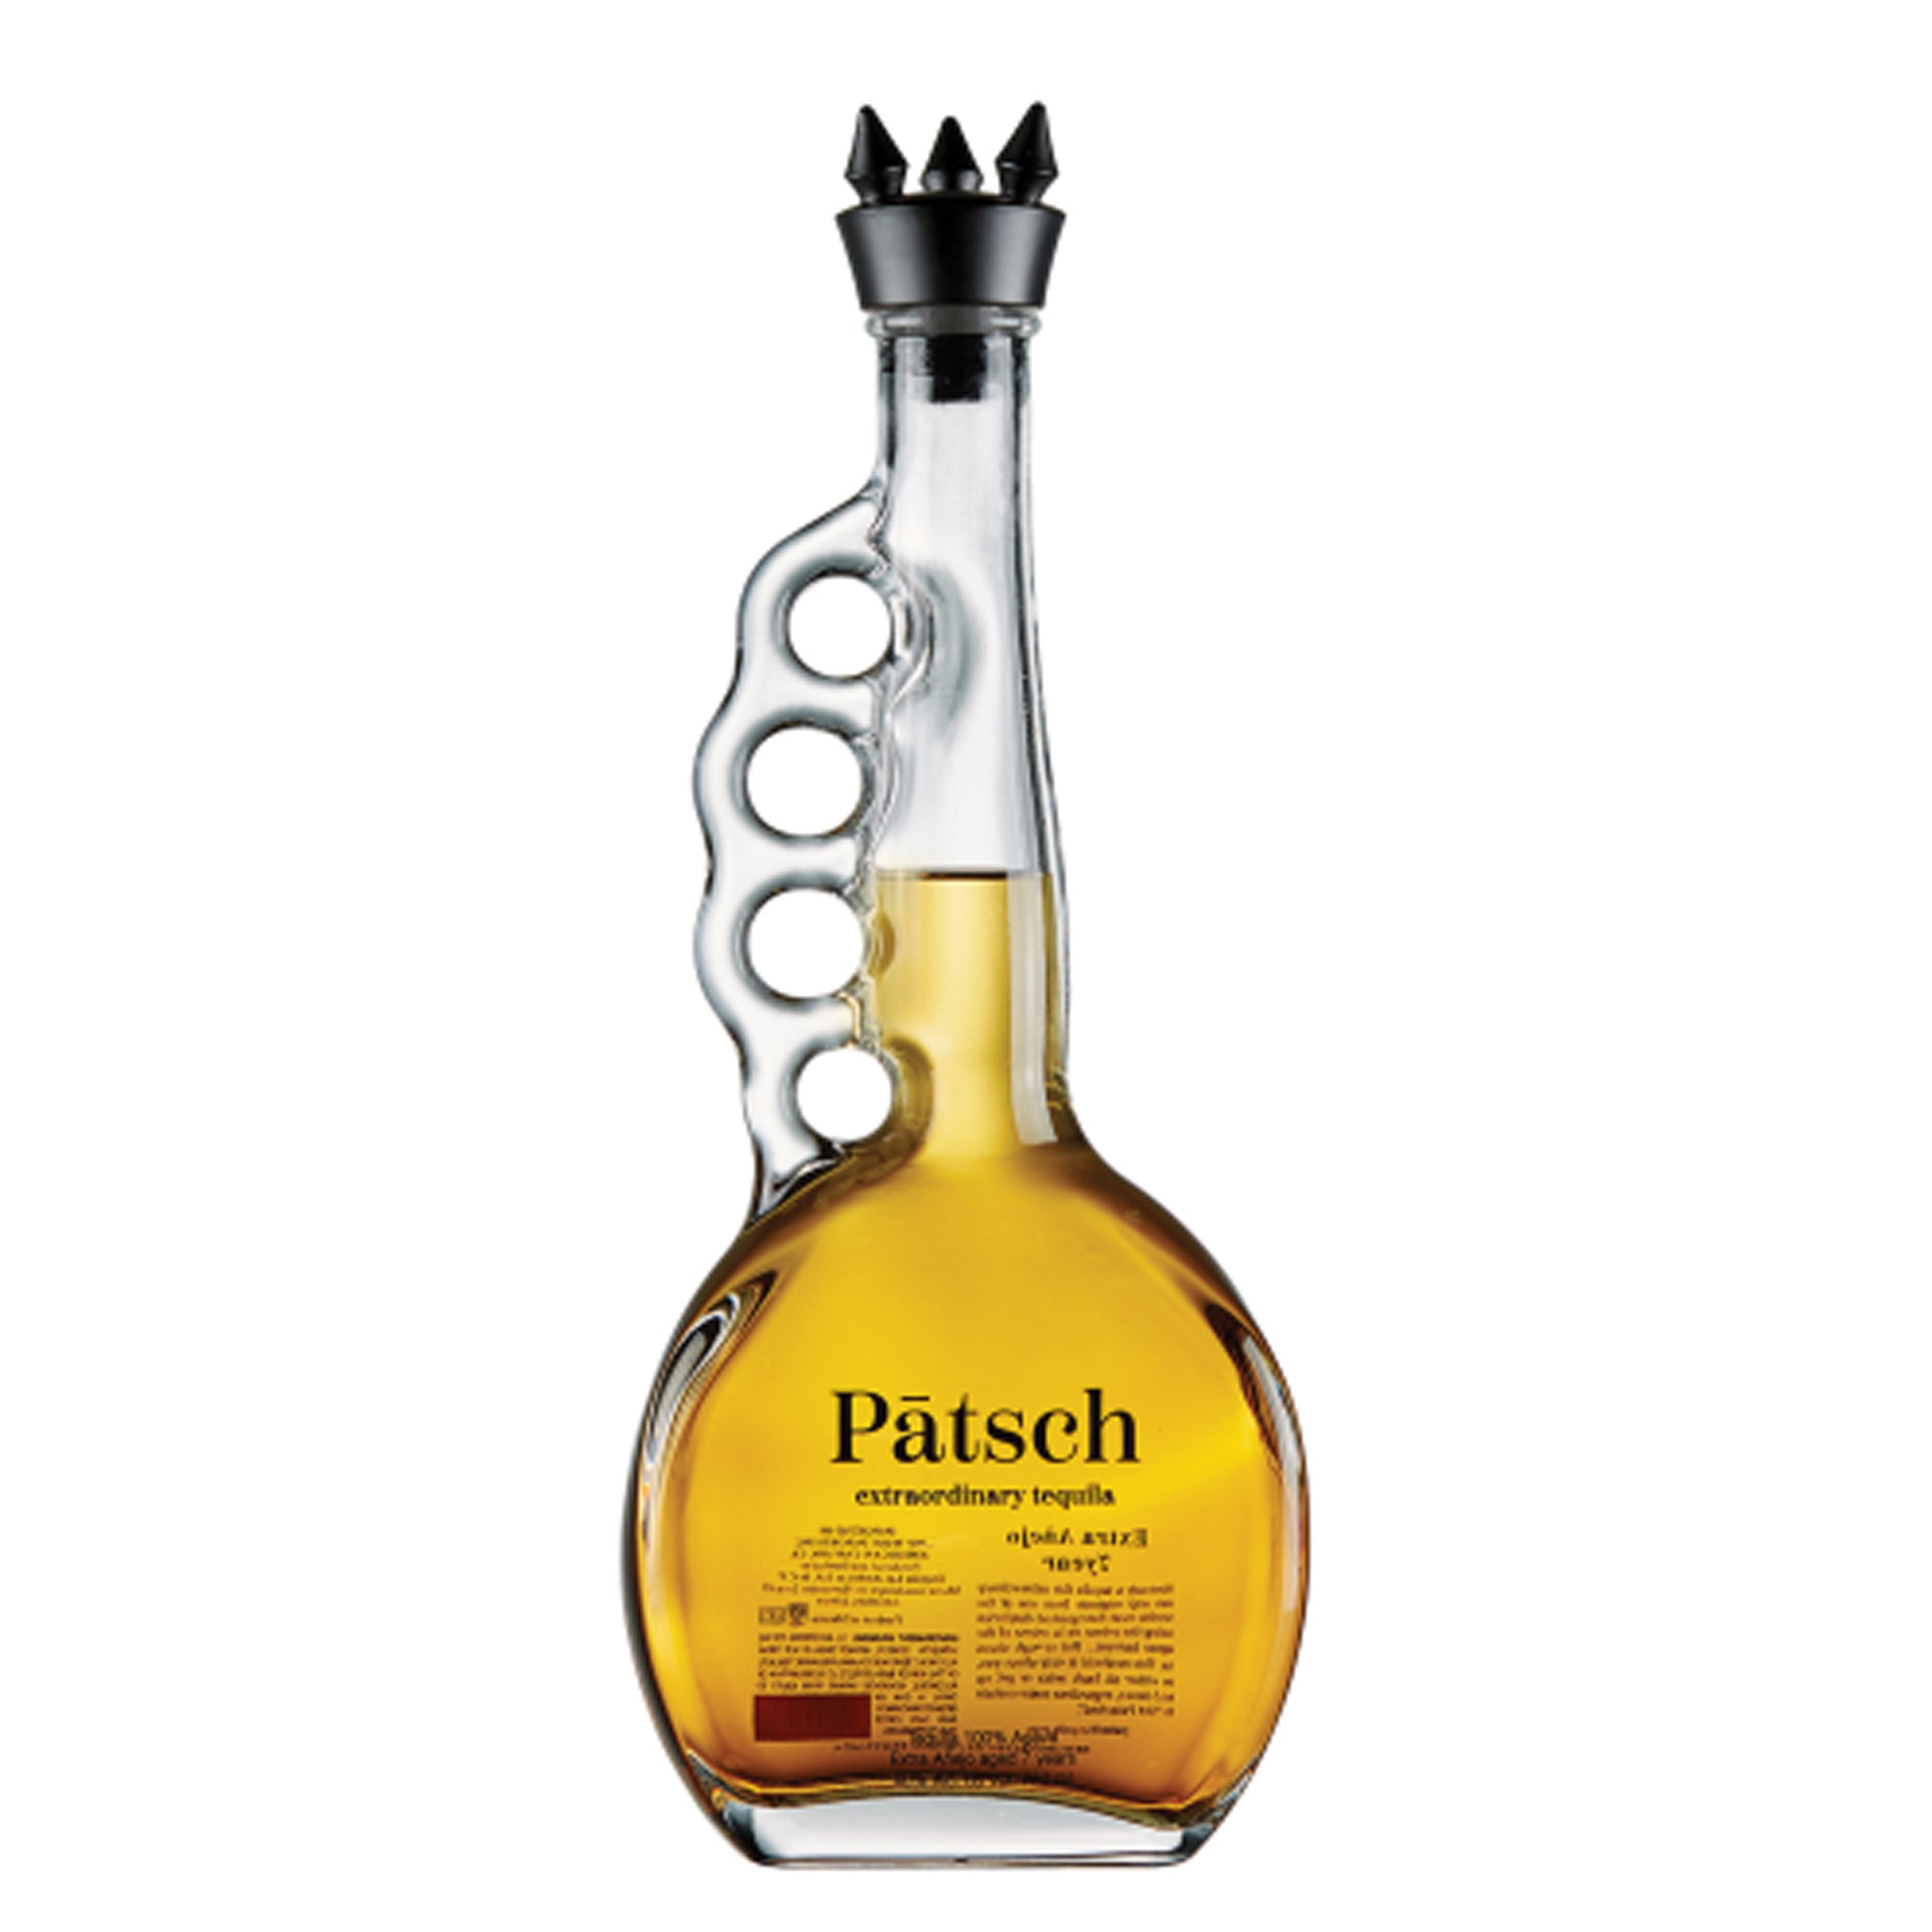 Patsch 7 Year Extra Anejo Tequila